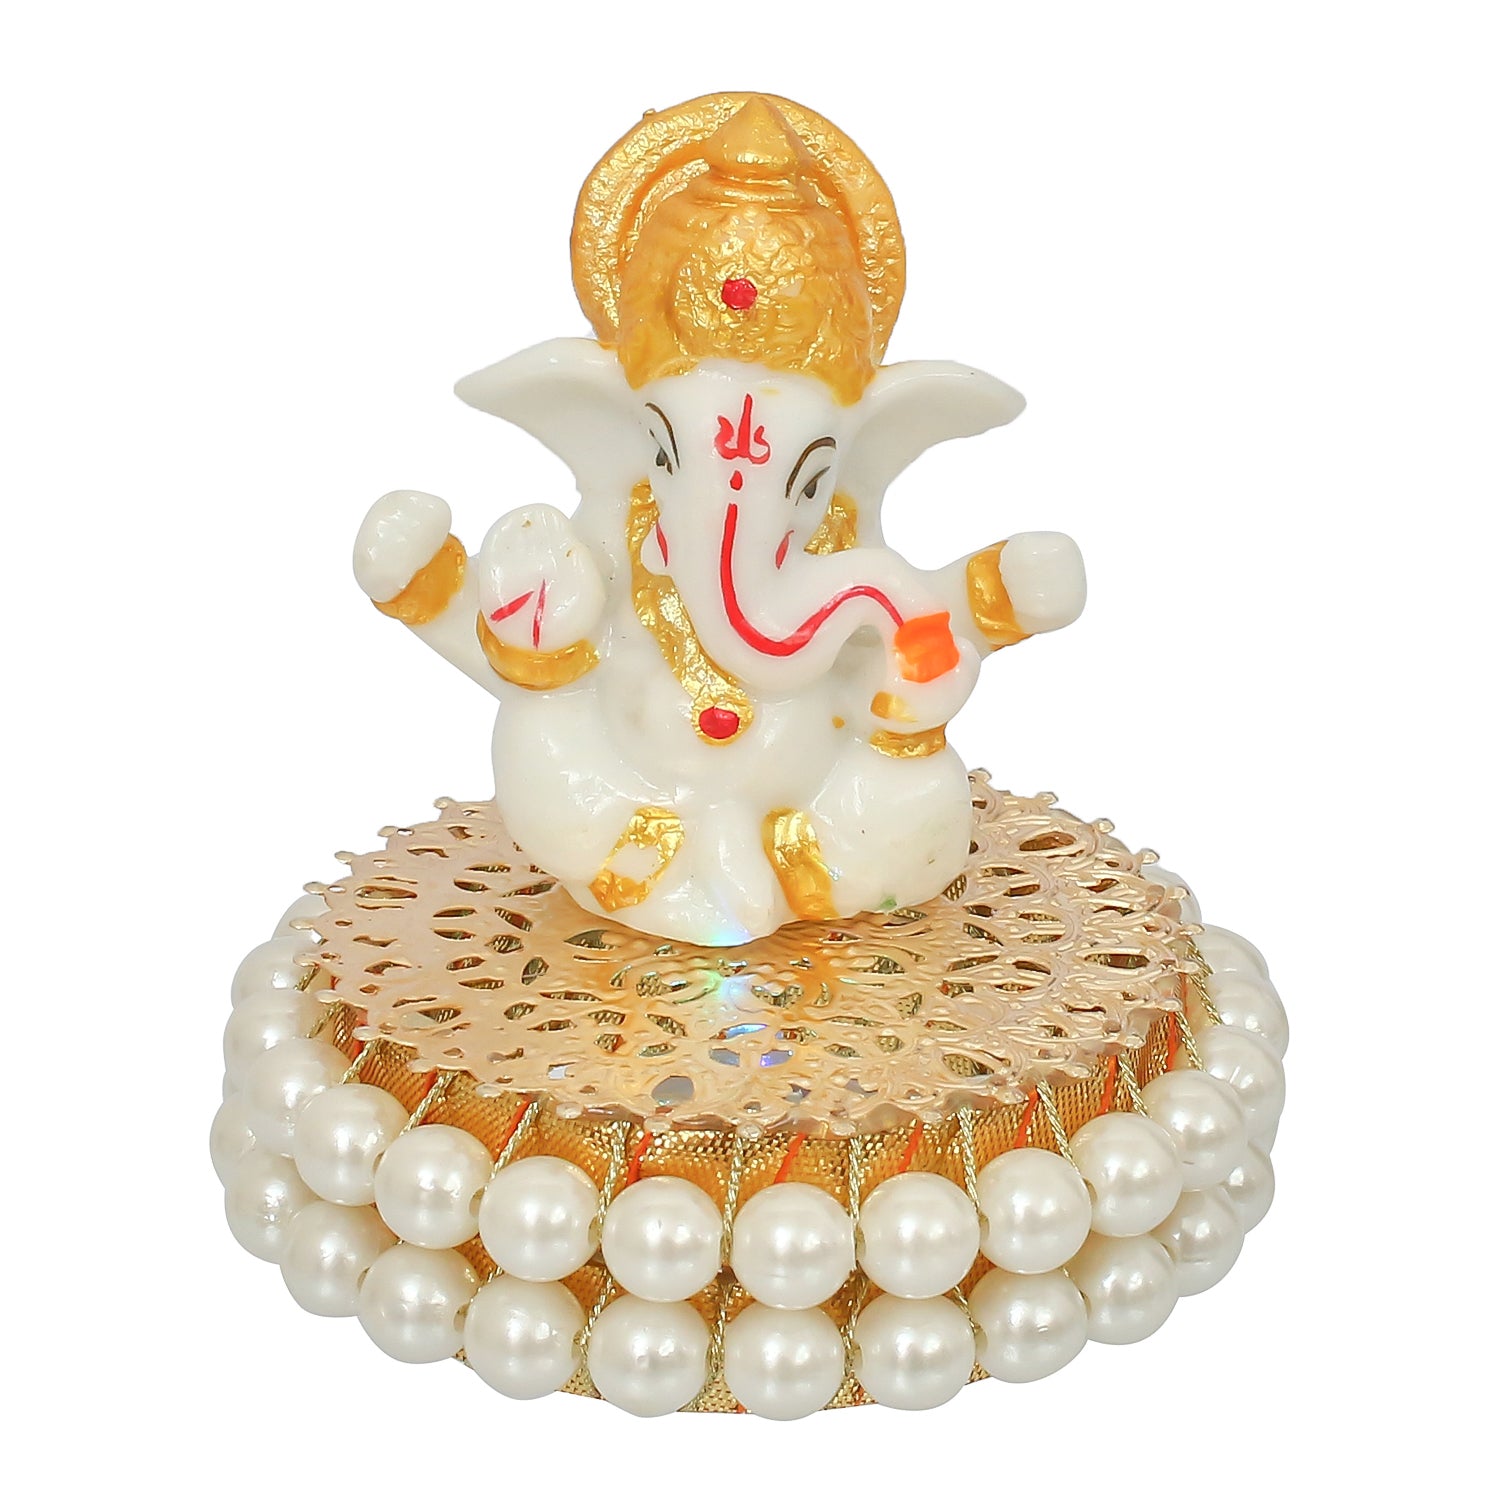 Gold and White Polyresin Lord Ganesha Idol on Decorative Handcrafted Plate for Home and Car Dashboard 4